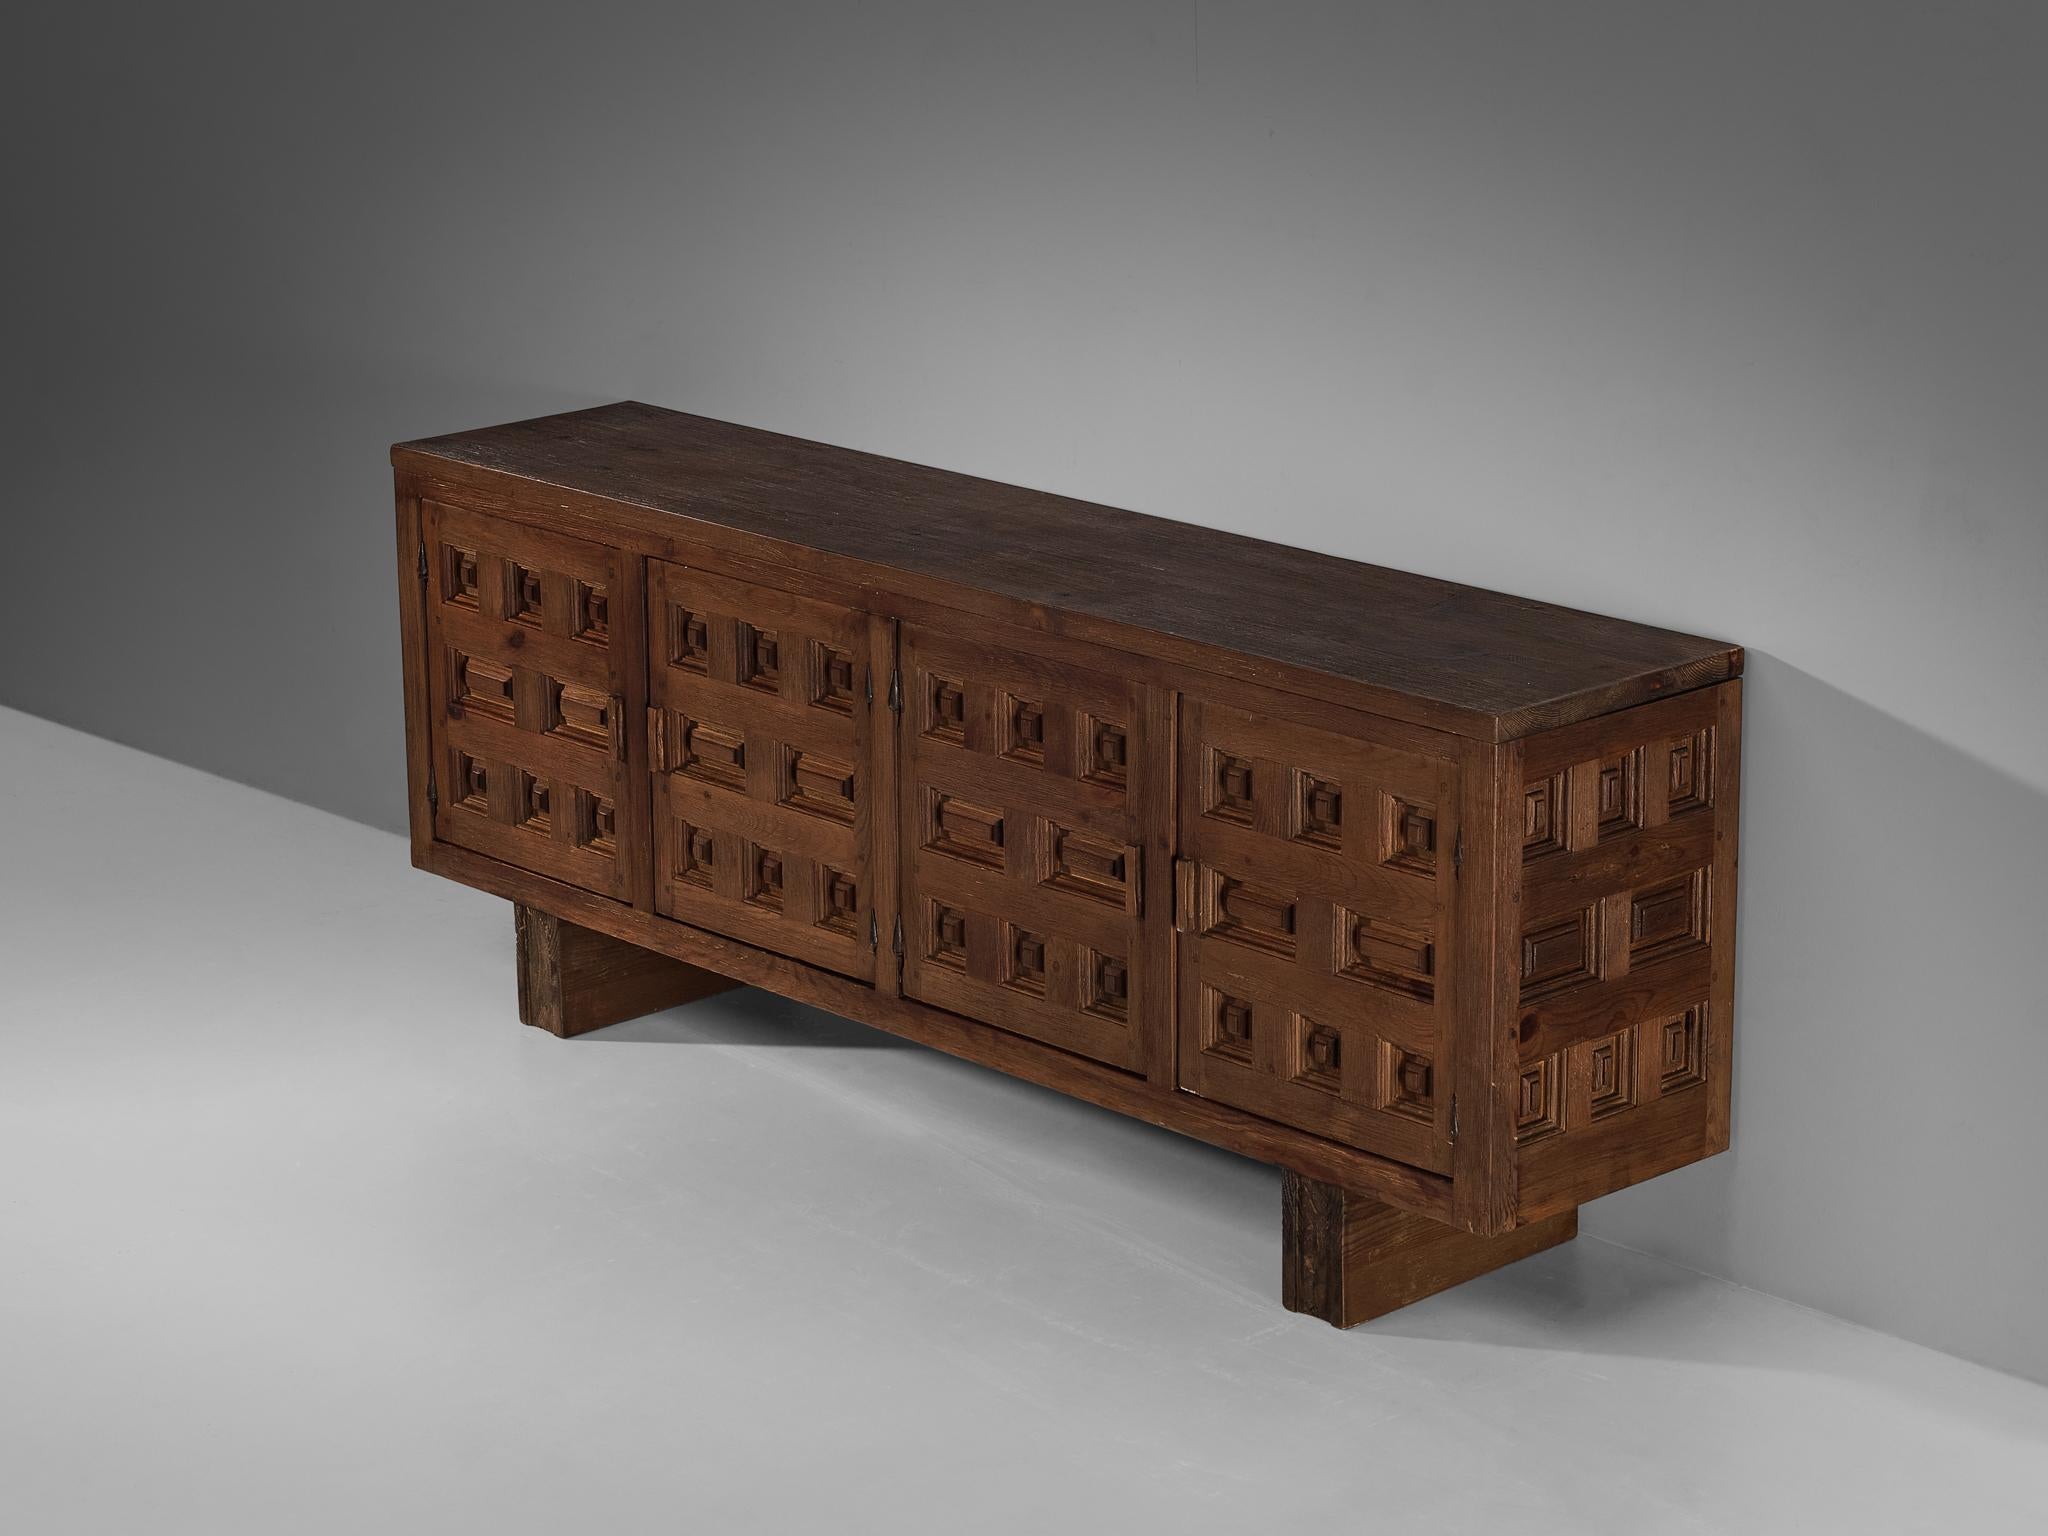 Biosca, sideboard, stained pine, Spain, 1960s.

Outstanding Spanish sideboard that is executed by Biosca in a beautiful way. The door panels feature a relief surface of graphic carved figures, alternating between rectangular and square shapes. This